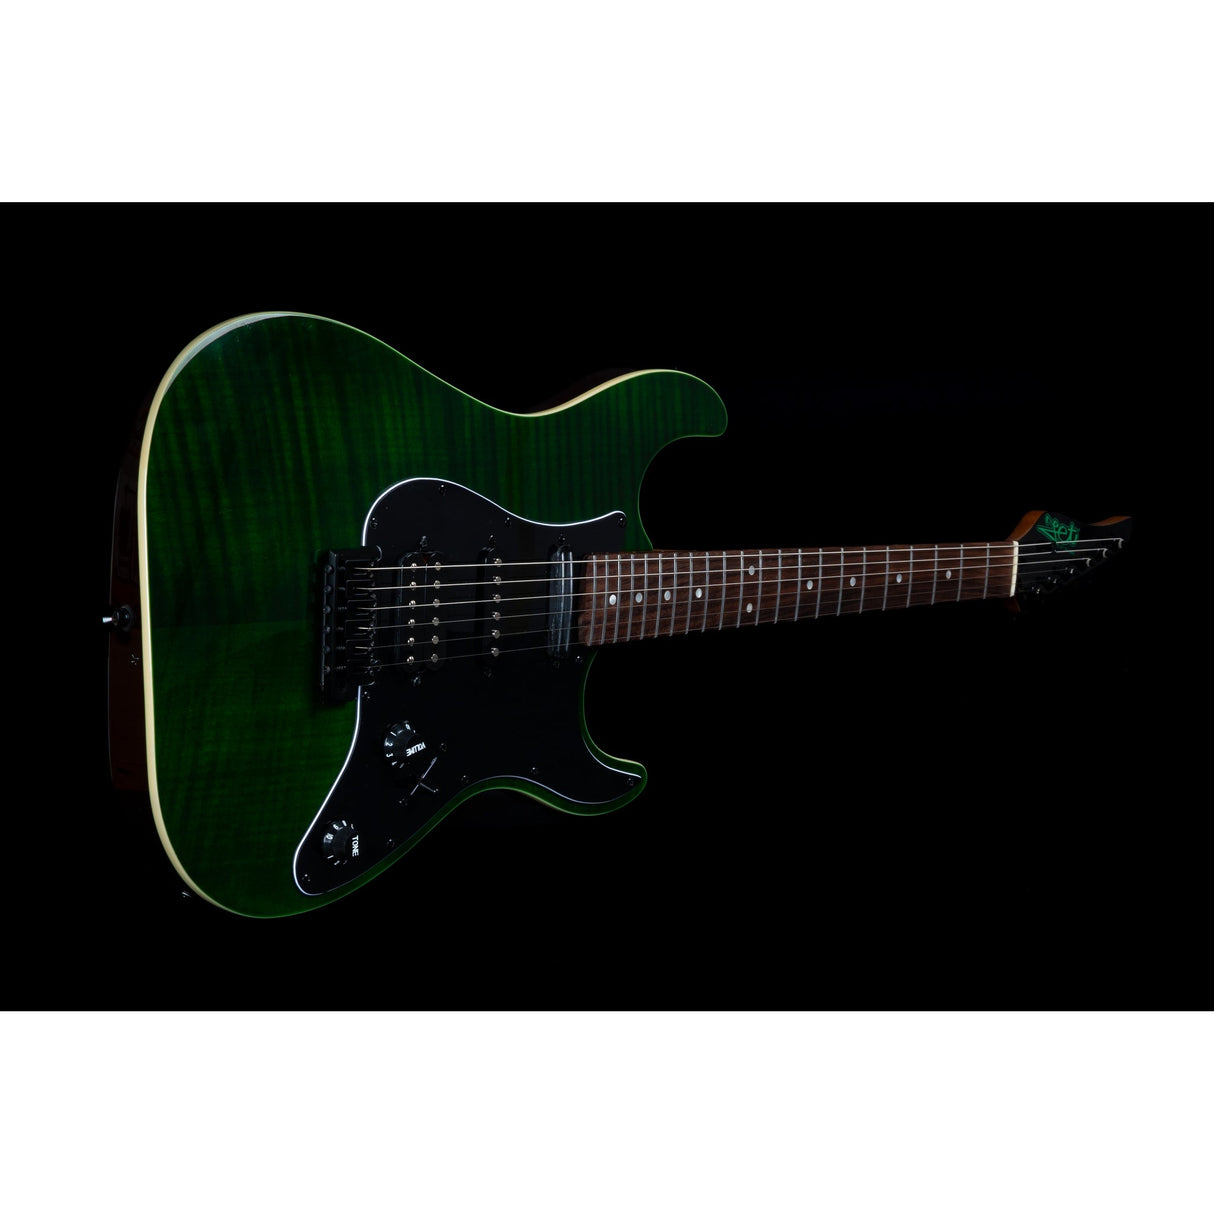 Jet Guitars JS-450 Canadian Roasted Maple Basswood Electric Guitar with HSS Ceramic Pickup, Transparent Green